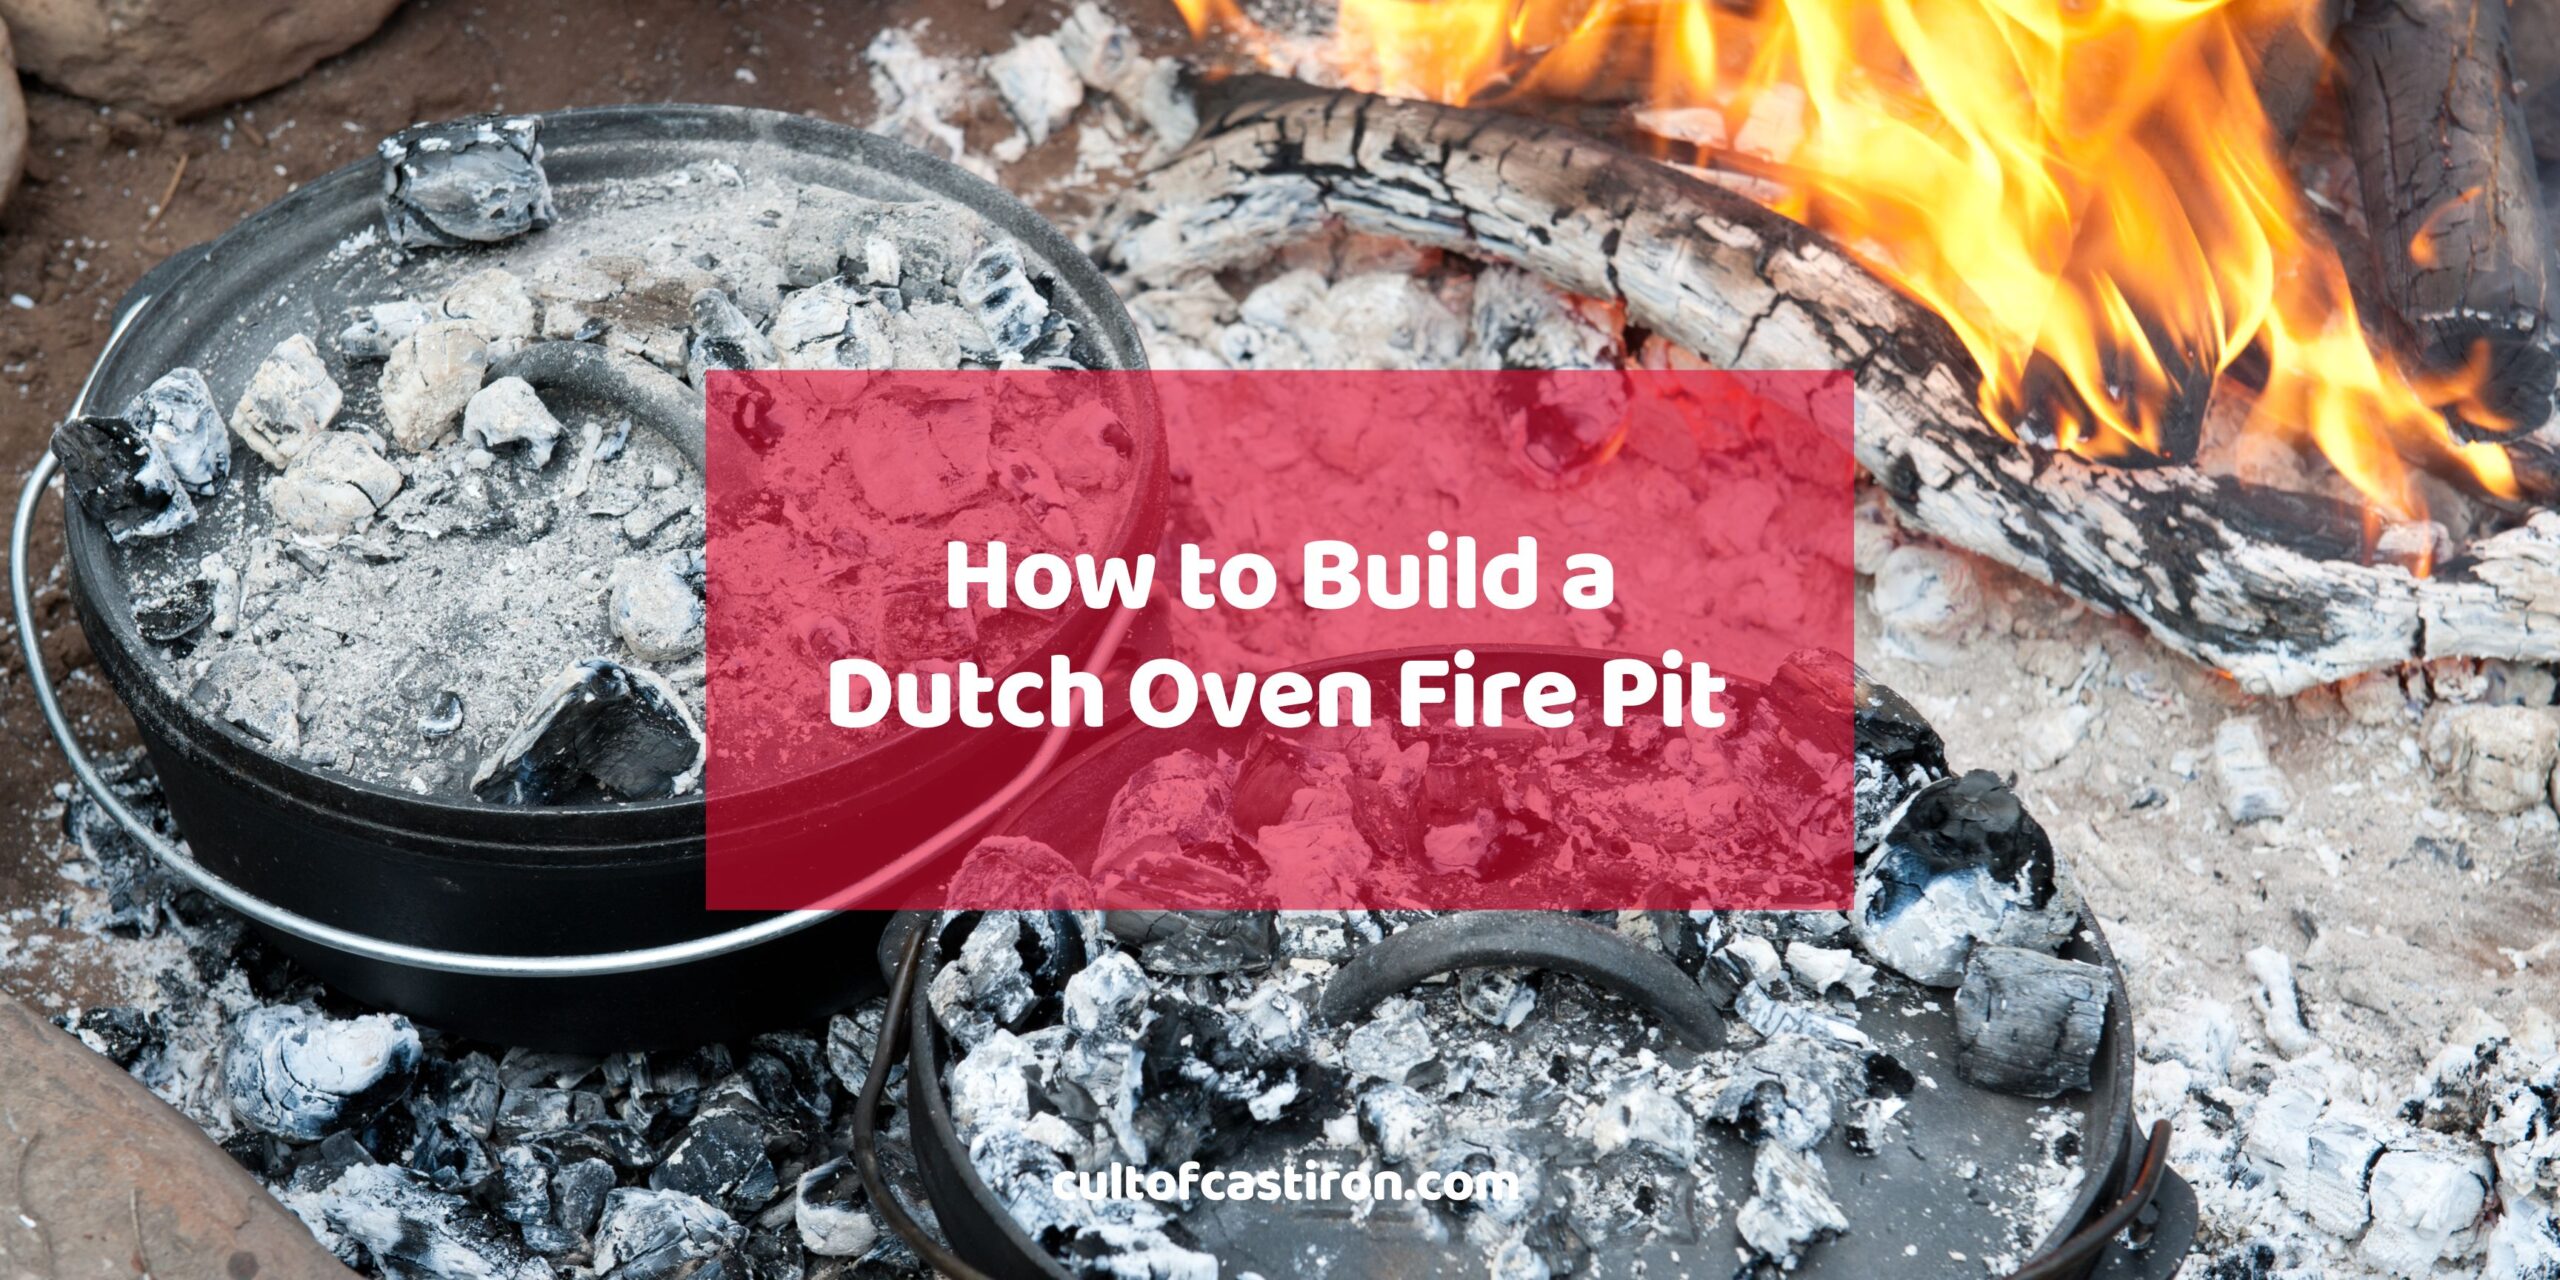 New to camp fire Dutch oven cooking - help me understand heat control! : r/ castiron